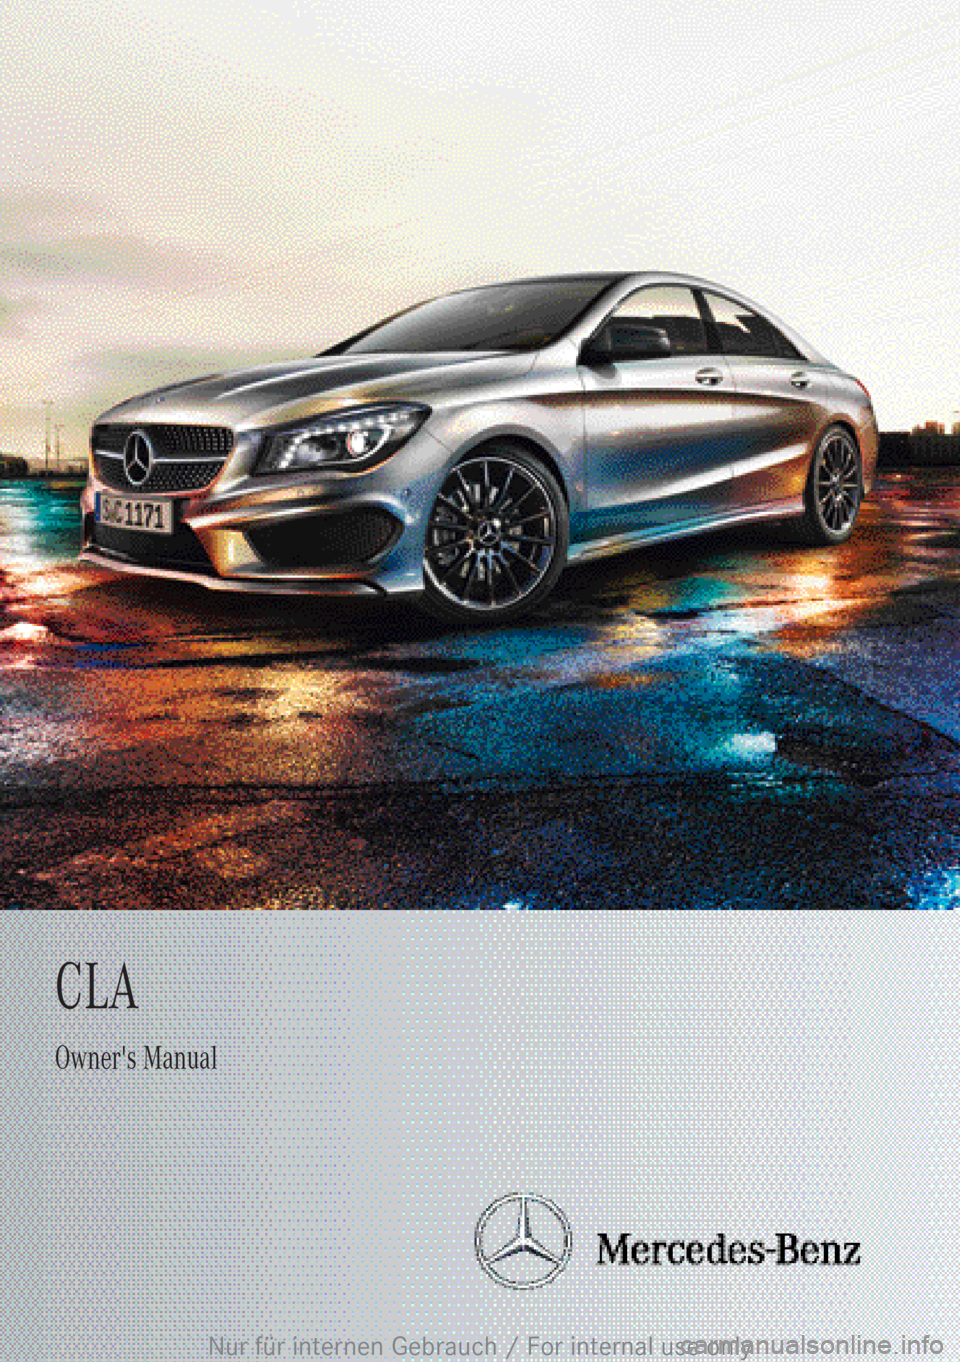 MERCEDES-BENZ CLA 2013  Owners Manual 